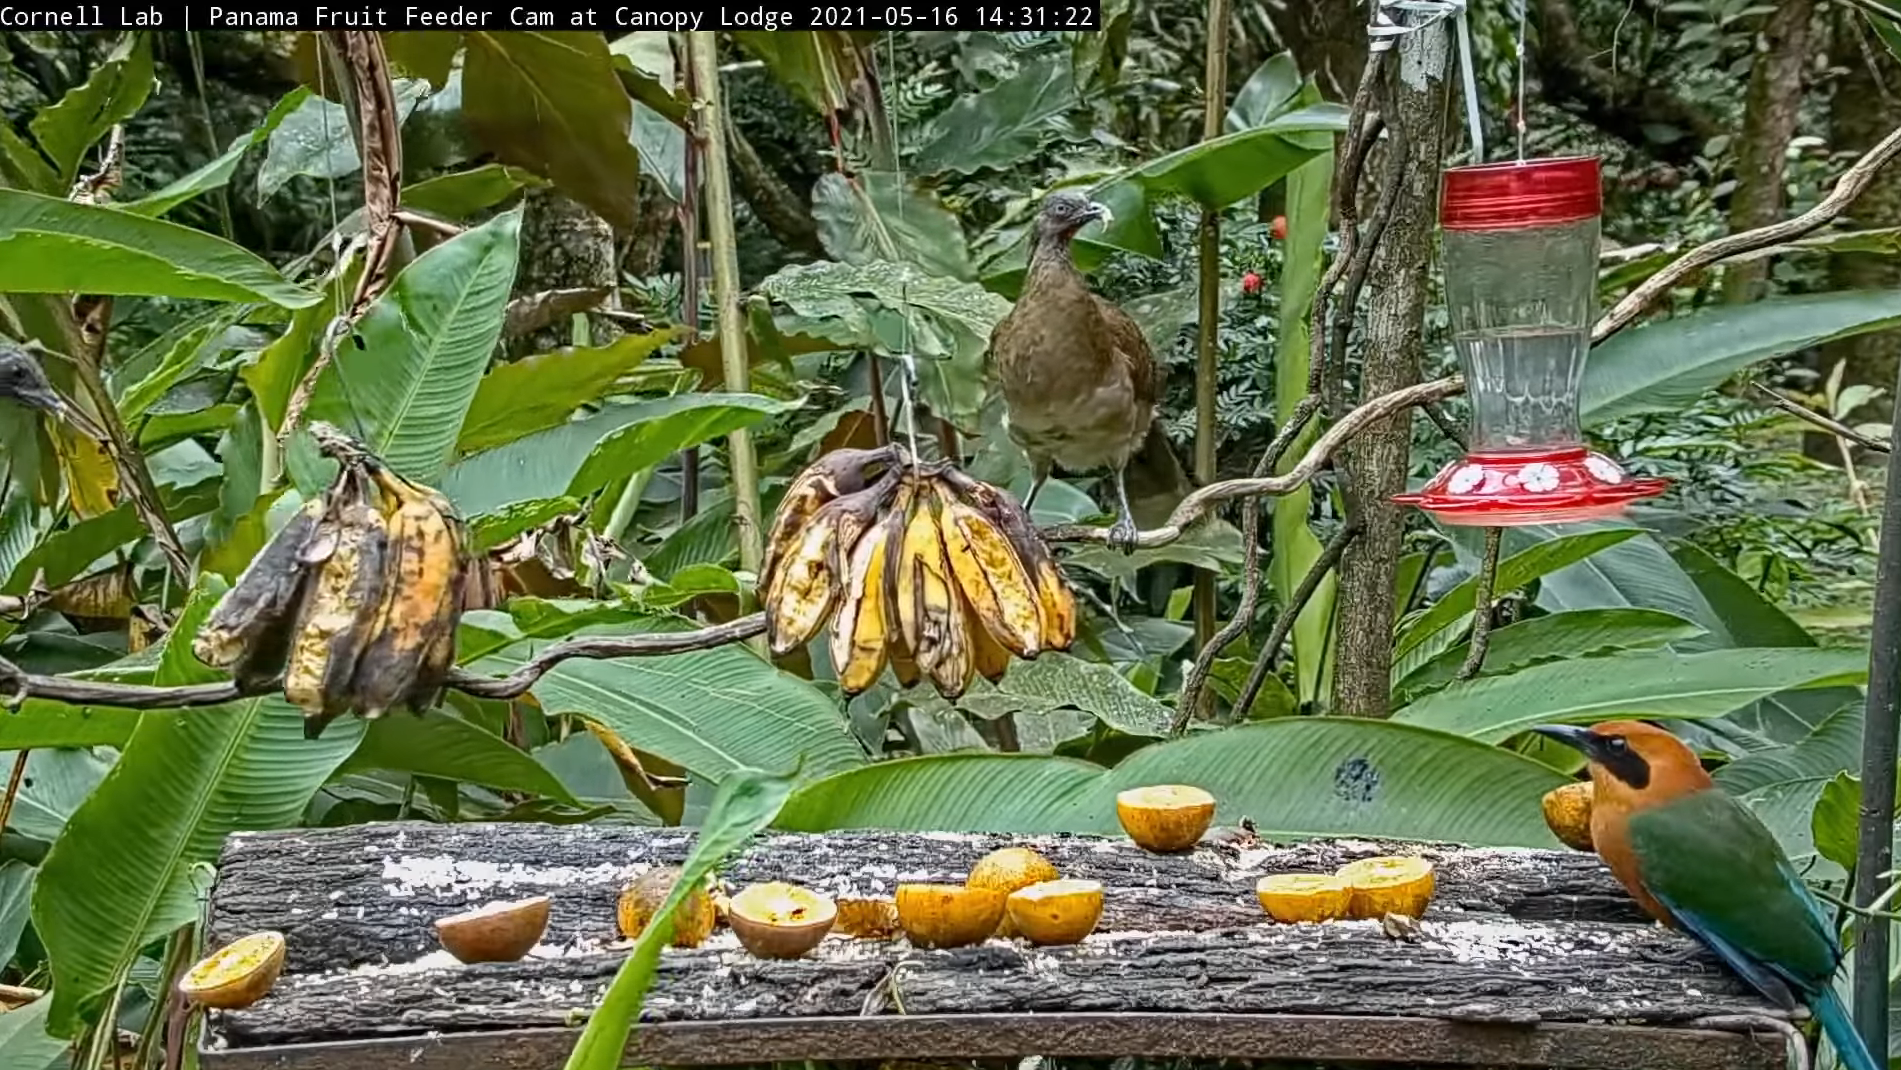 A feeding table with rice and half-cut oranges that are yellow. Over head are two hooks with banana bunches. There is also a nectar hanging. A Rufous motmot (large yellow-green, blue bird) is perched in the front right corner o the table. A gray-headed chachalaca (large gray-brown bird) is perched on a vine that runs horizontally across the screen. The backdrop are large green leaves and a couple tree trunks.